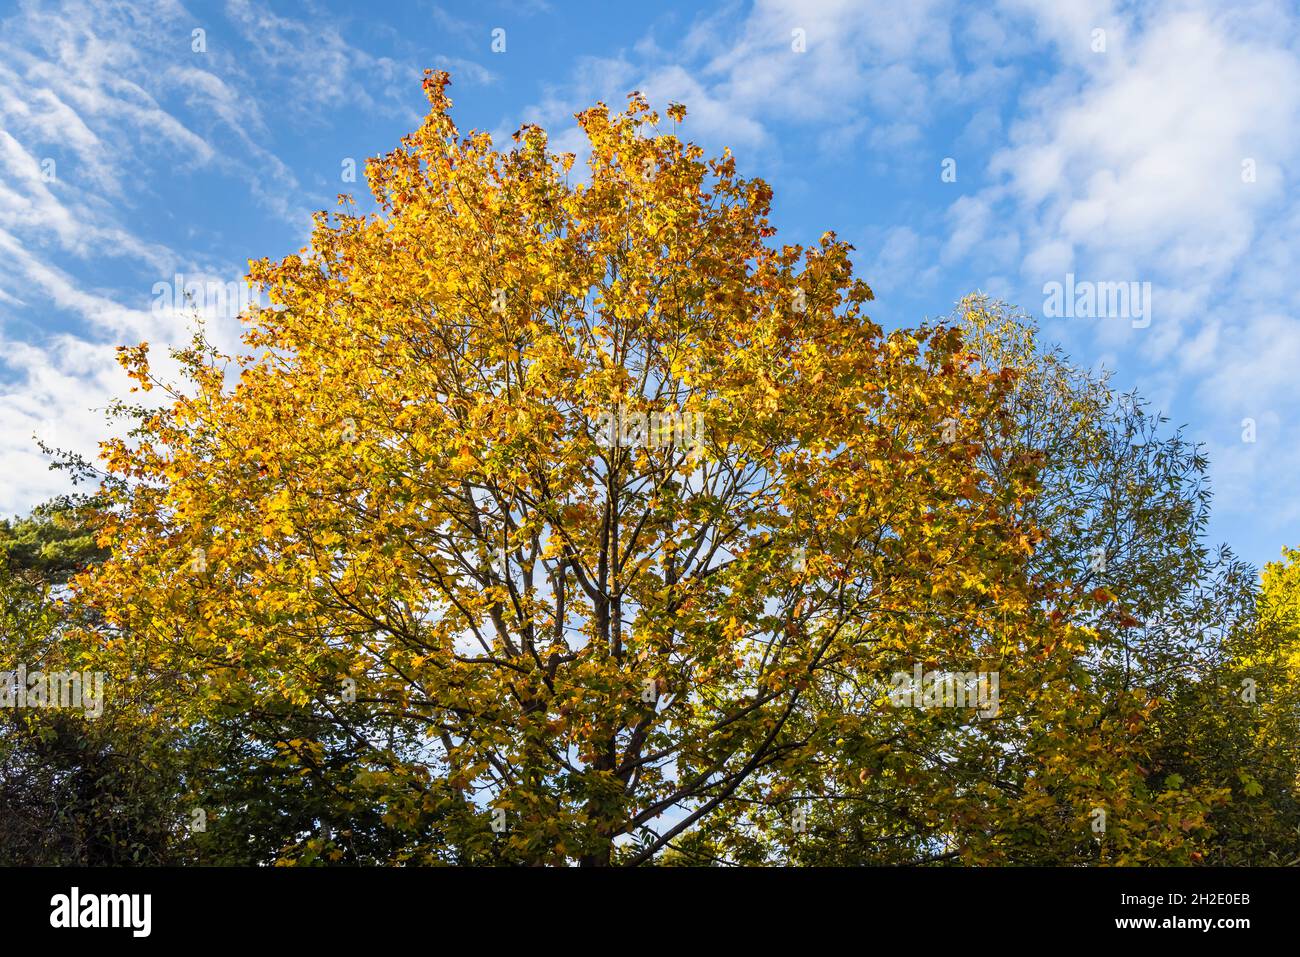 A sycamore (Acer pseudoplatanus) tree crown in golden yellow autumn colour leaves under a blue sky with clouds in autumn in Surrey, south-east England Stock Photo